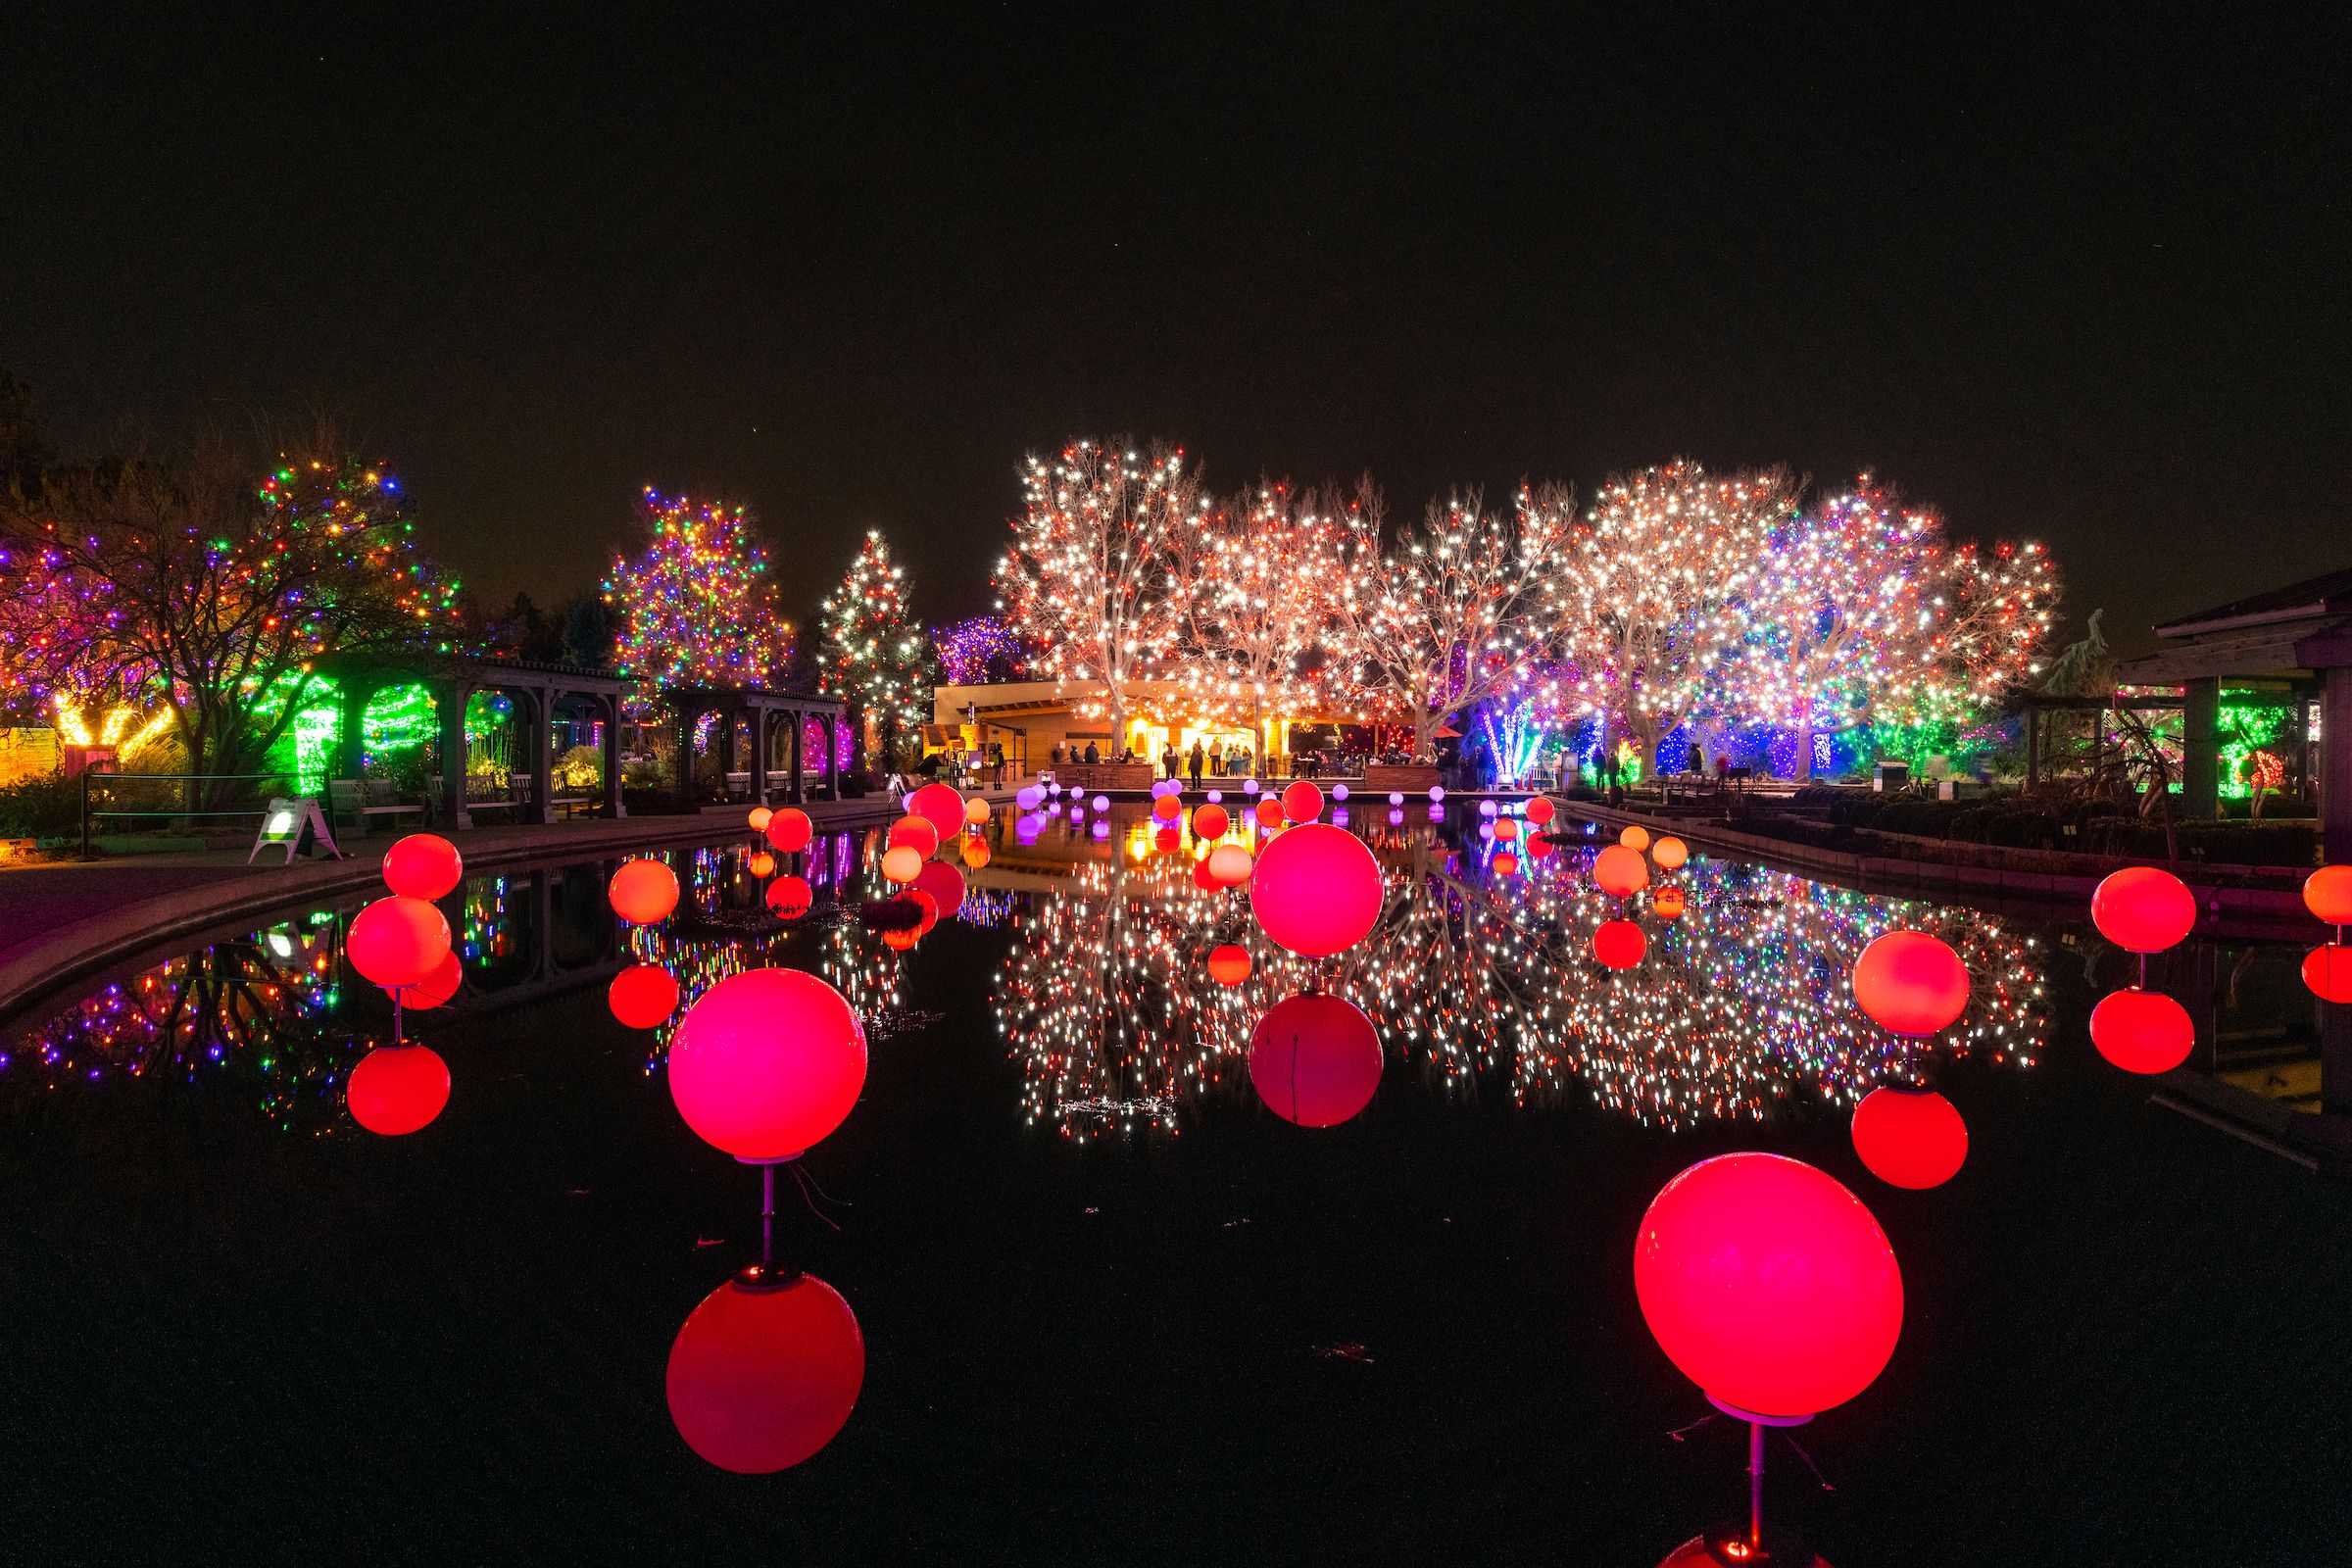 The 35 Best Christmas Lights Displays in the U.S.